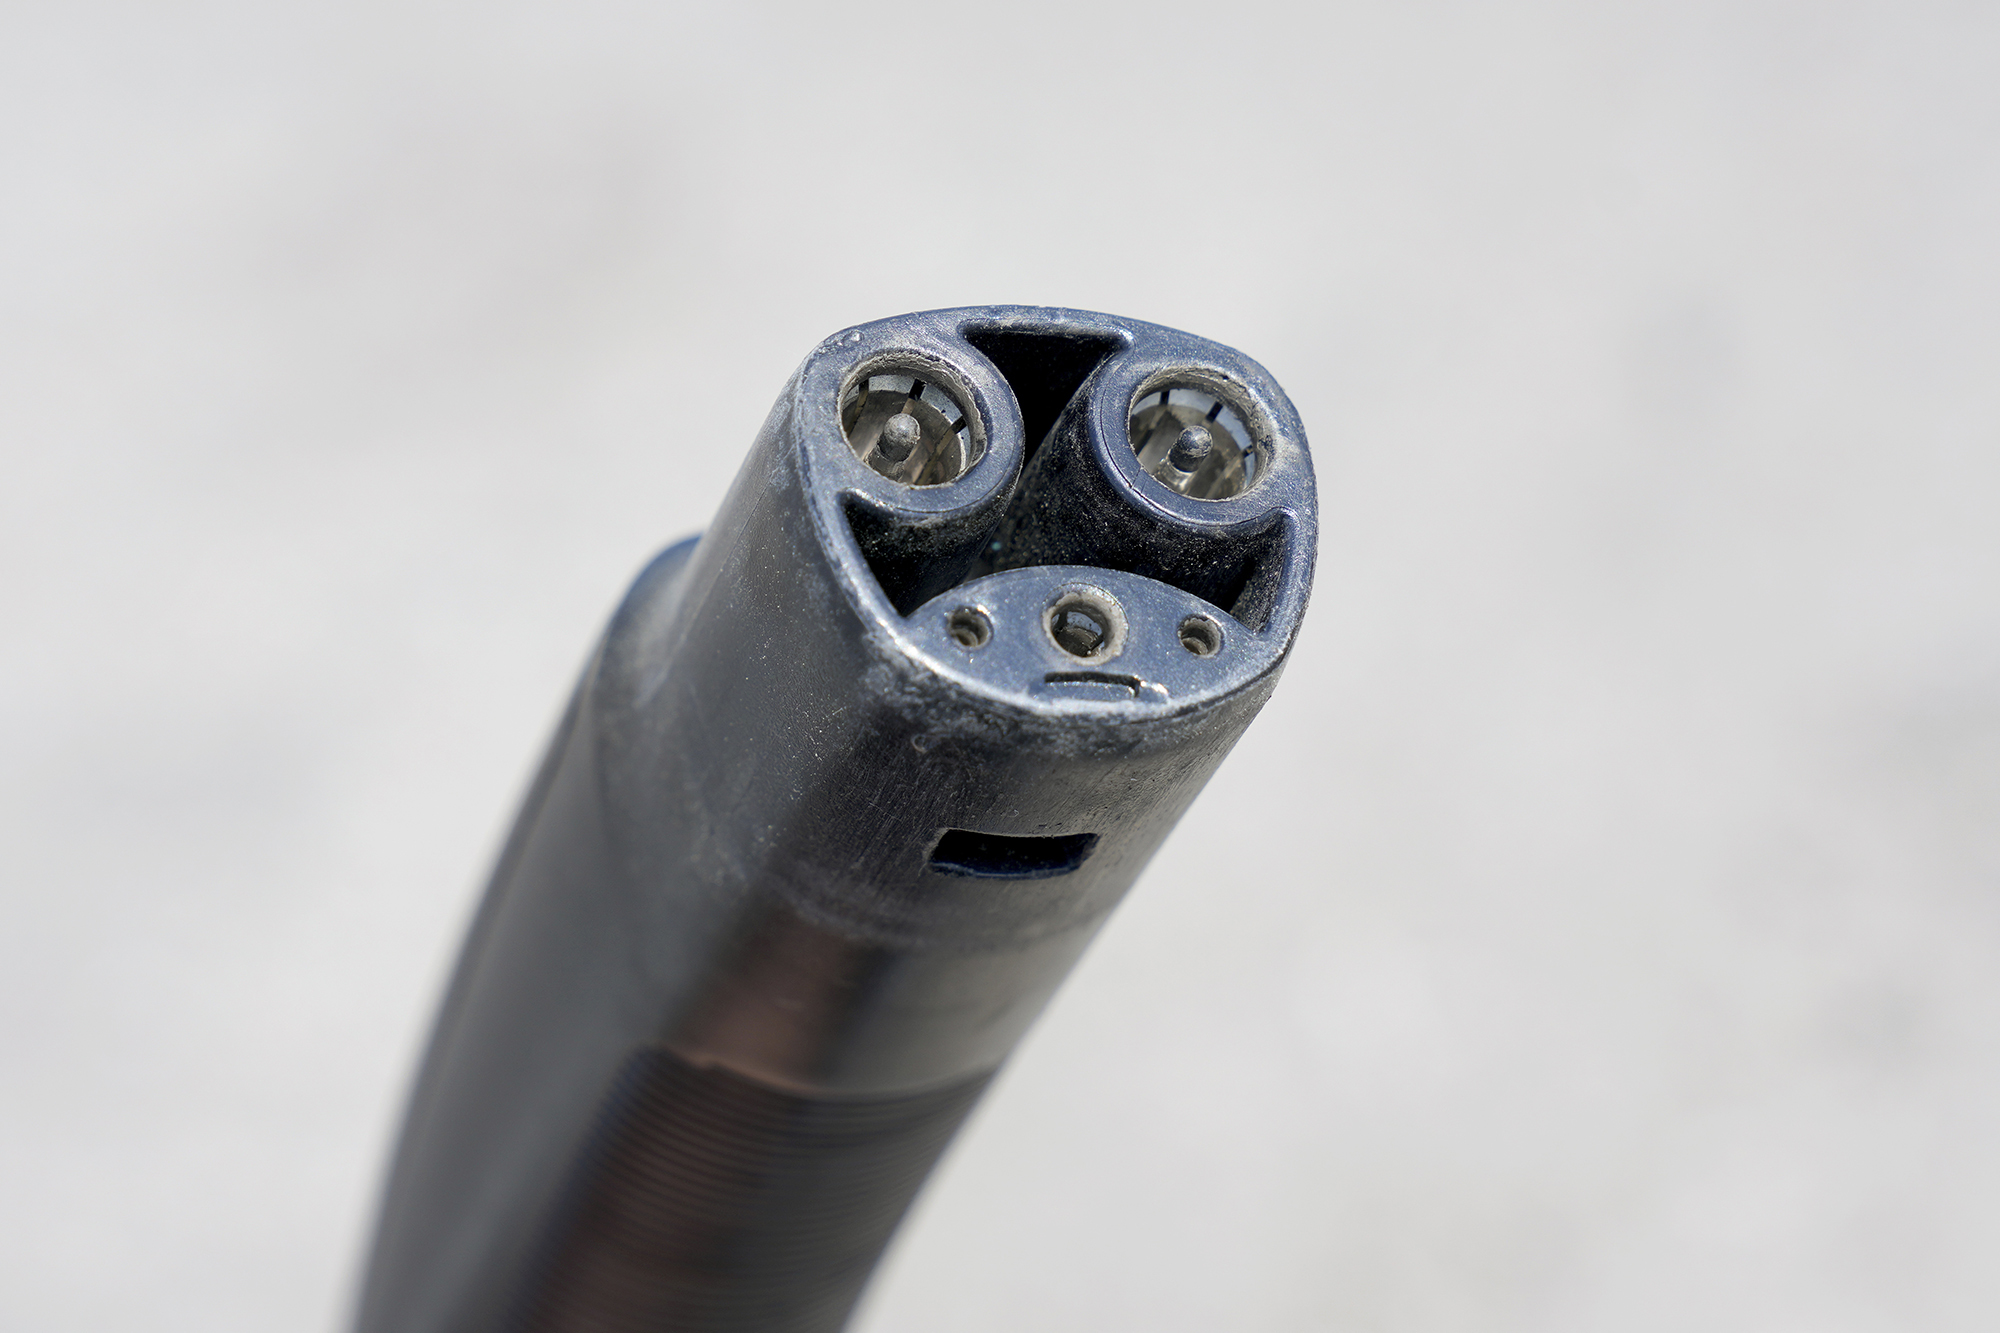 View of Tesla charger plug with pins.